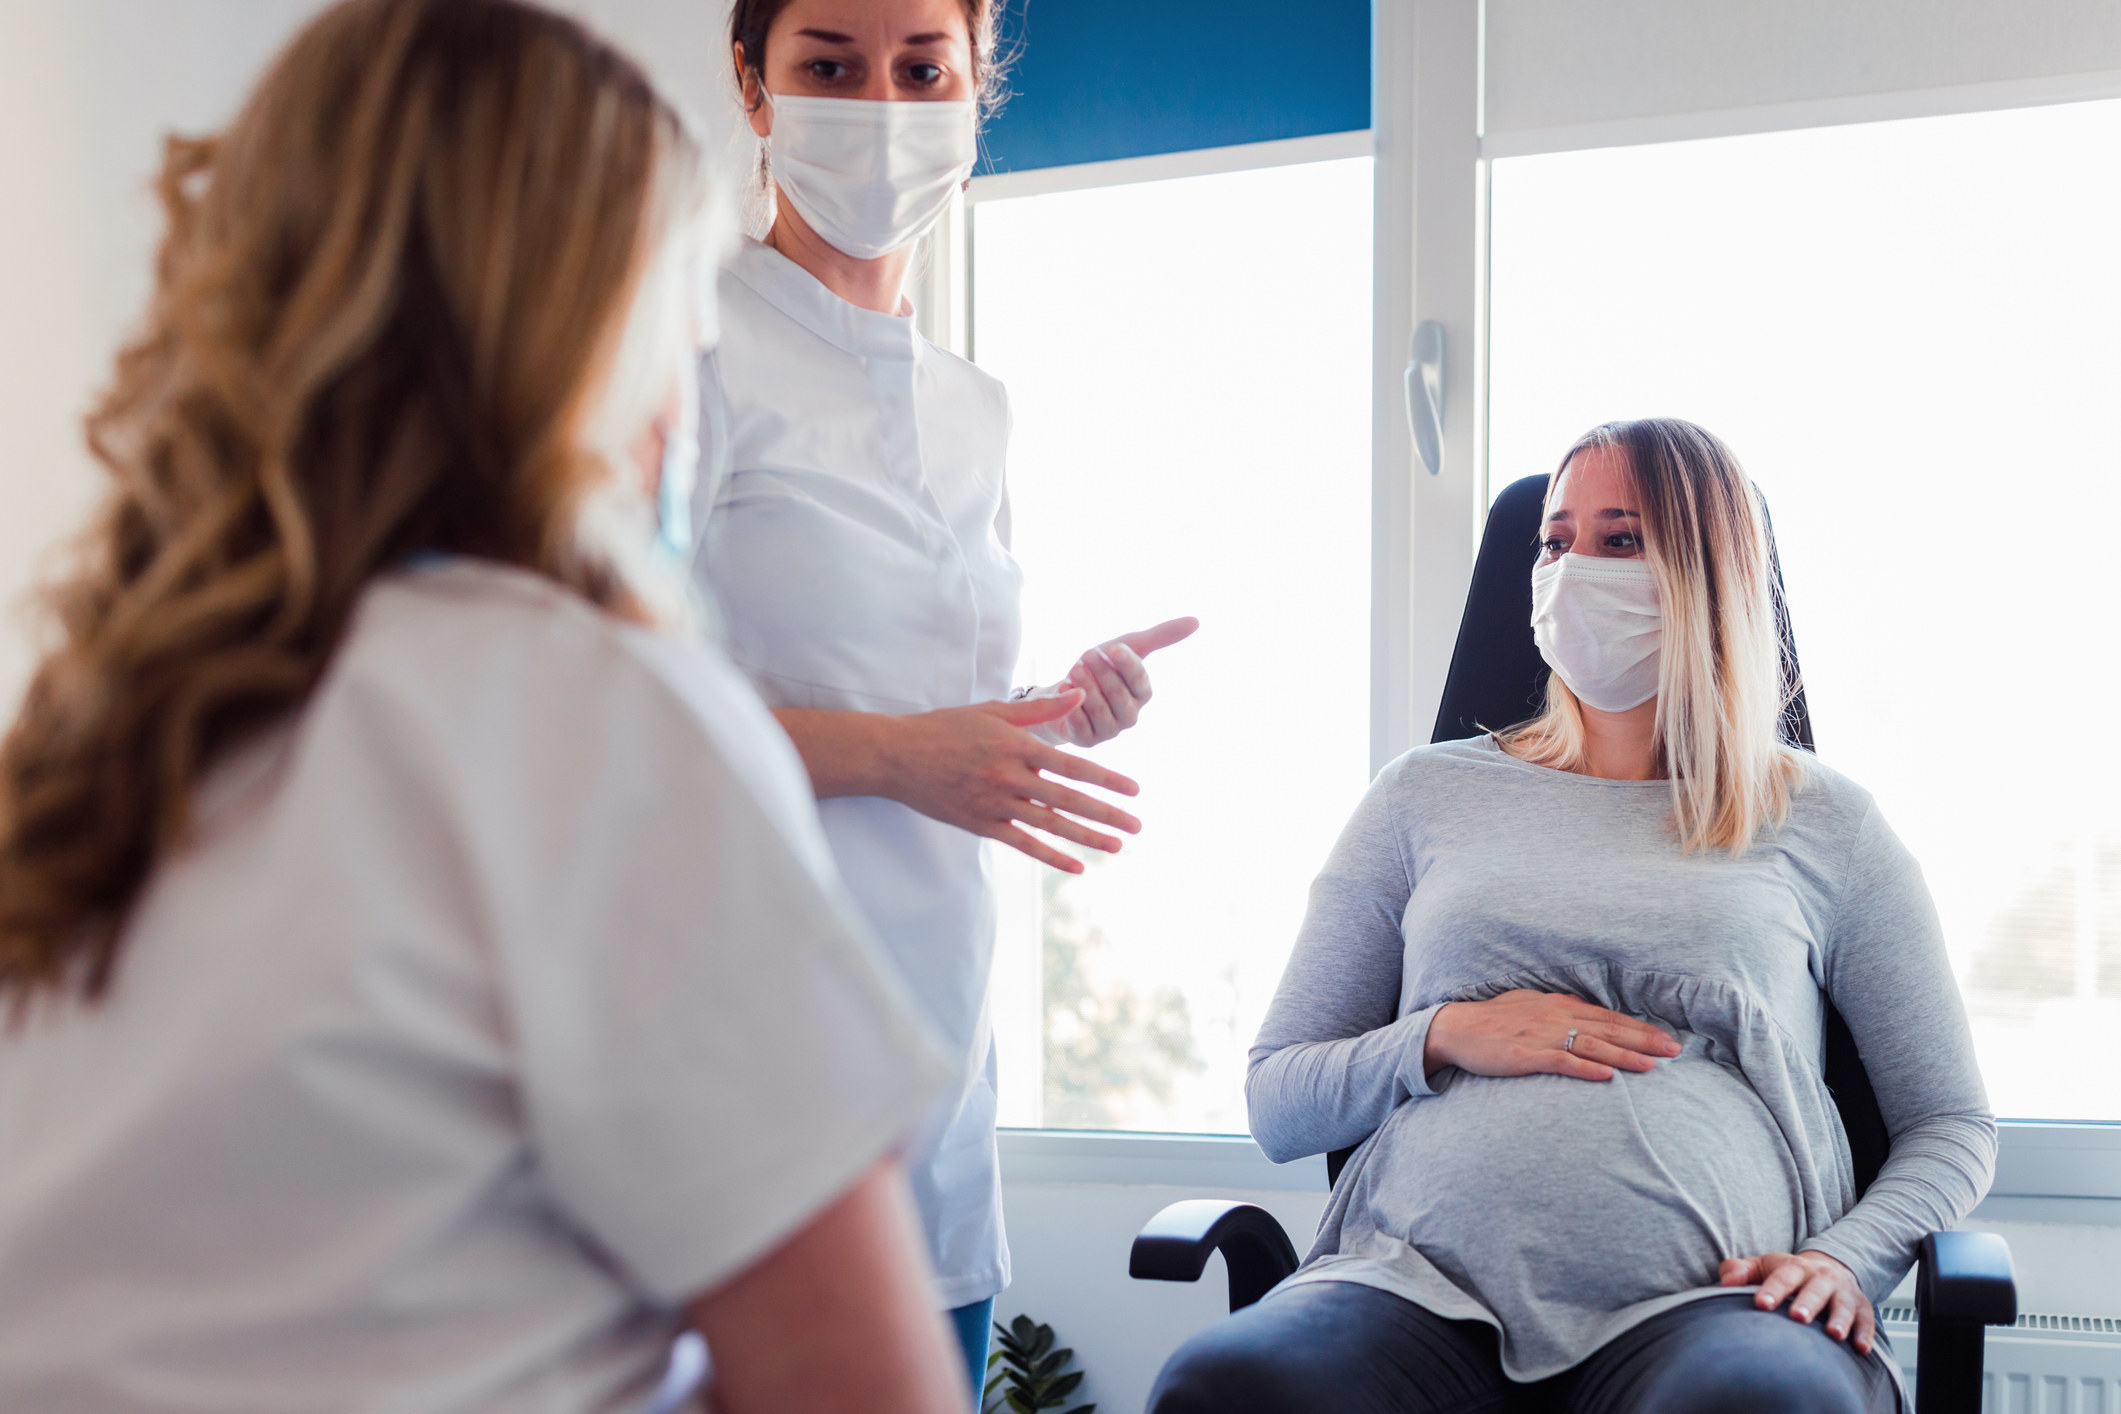 A pregnant woman sits with a mask on in a doctor&#x27;s office while two people watch over her